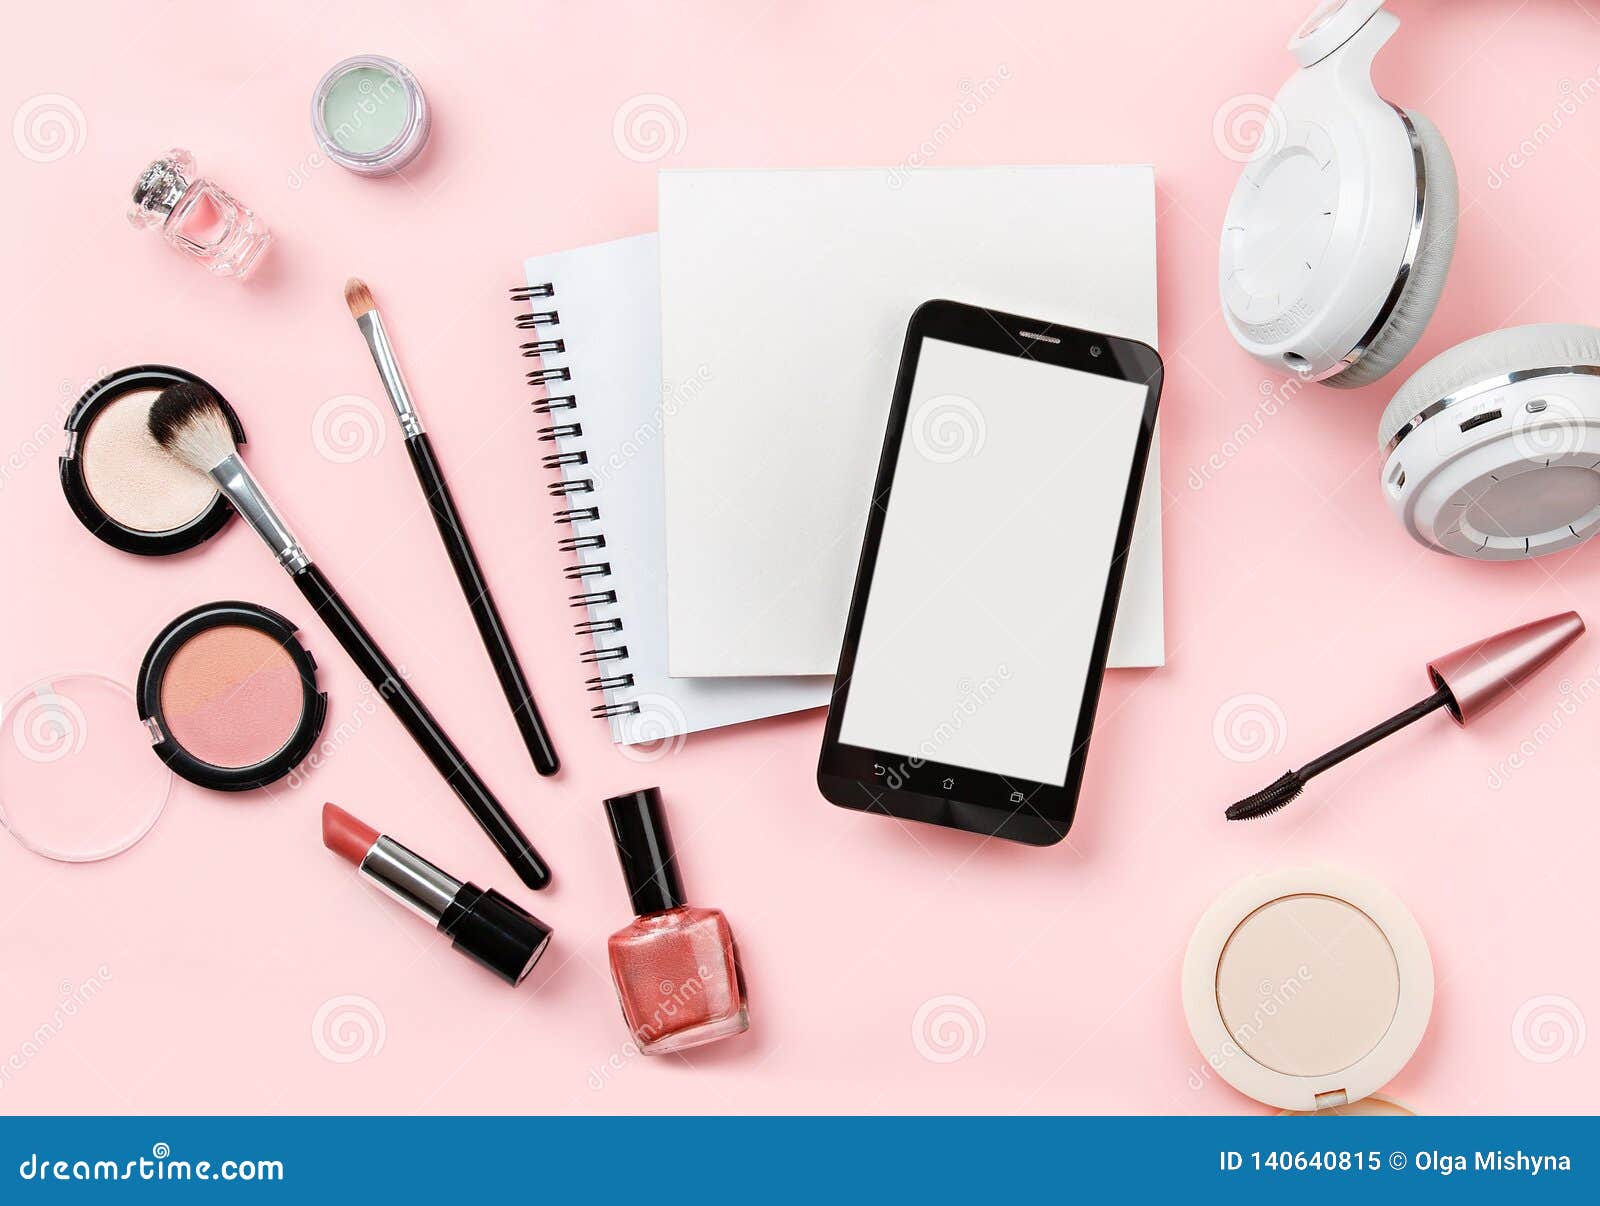 Download Mock Up Woman`s Cosmetics, Phone, Headphones And Glasses ...